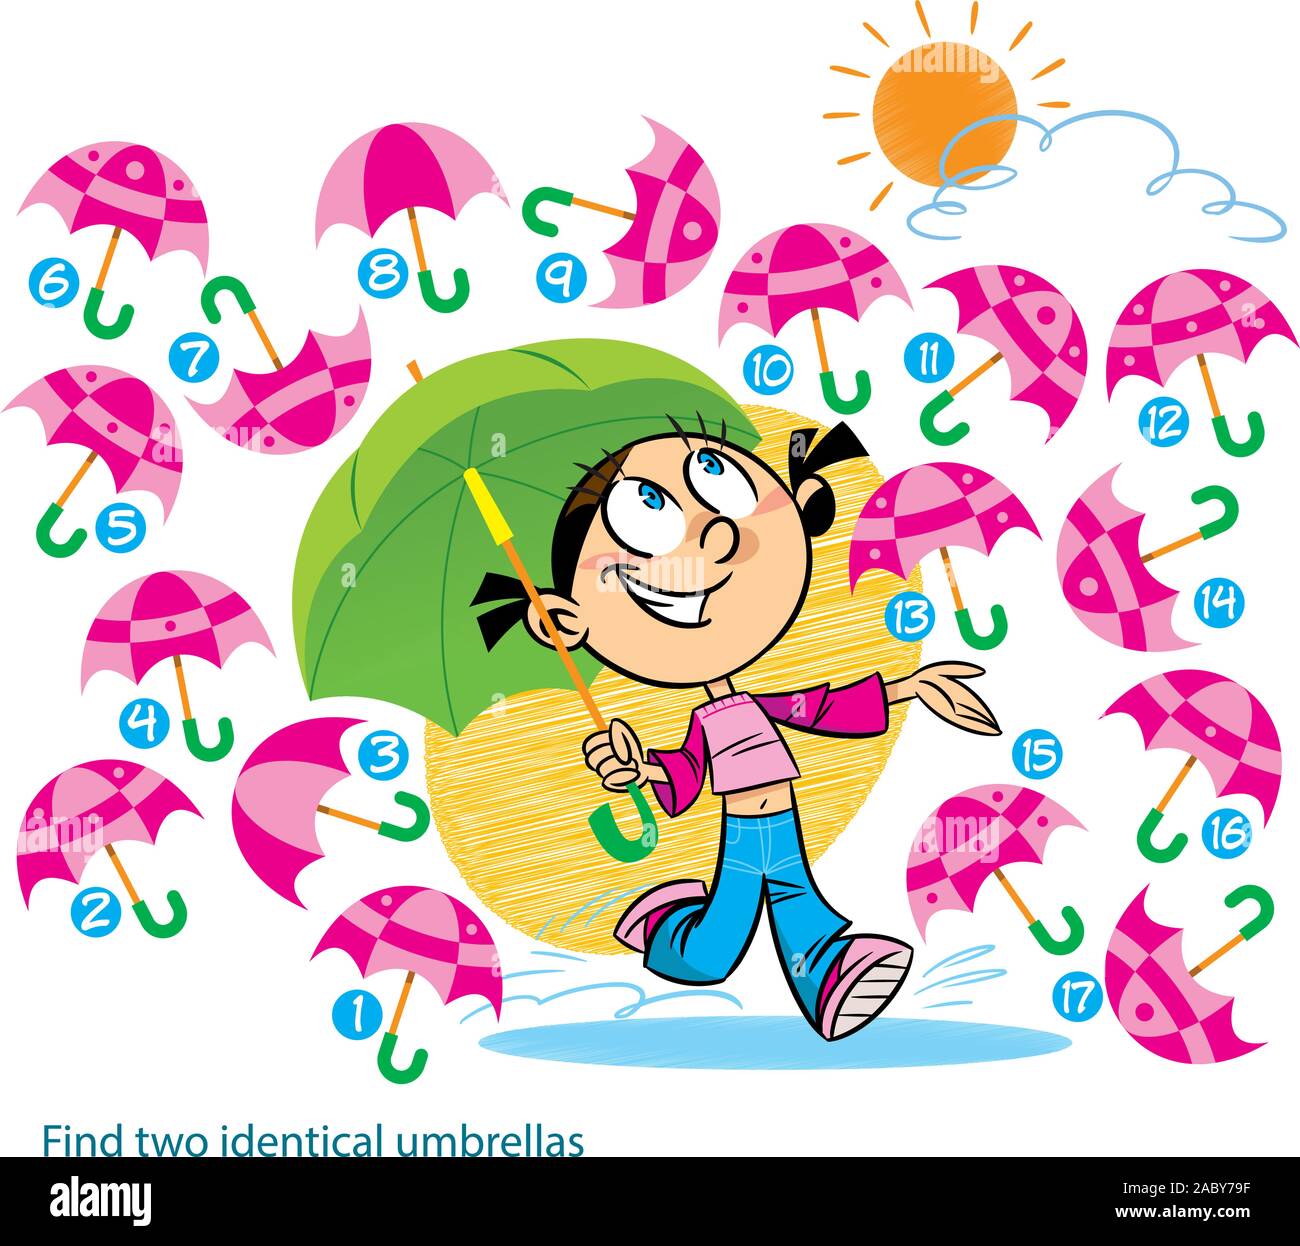 A vector illustration with a puzzle in which you need to find two identical umbrellas. Stock Vector